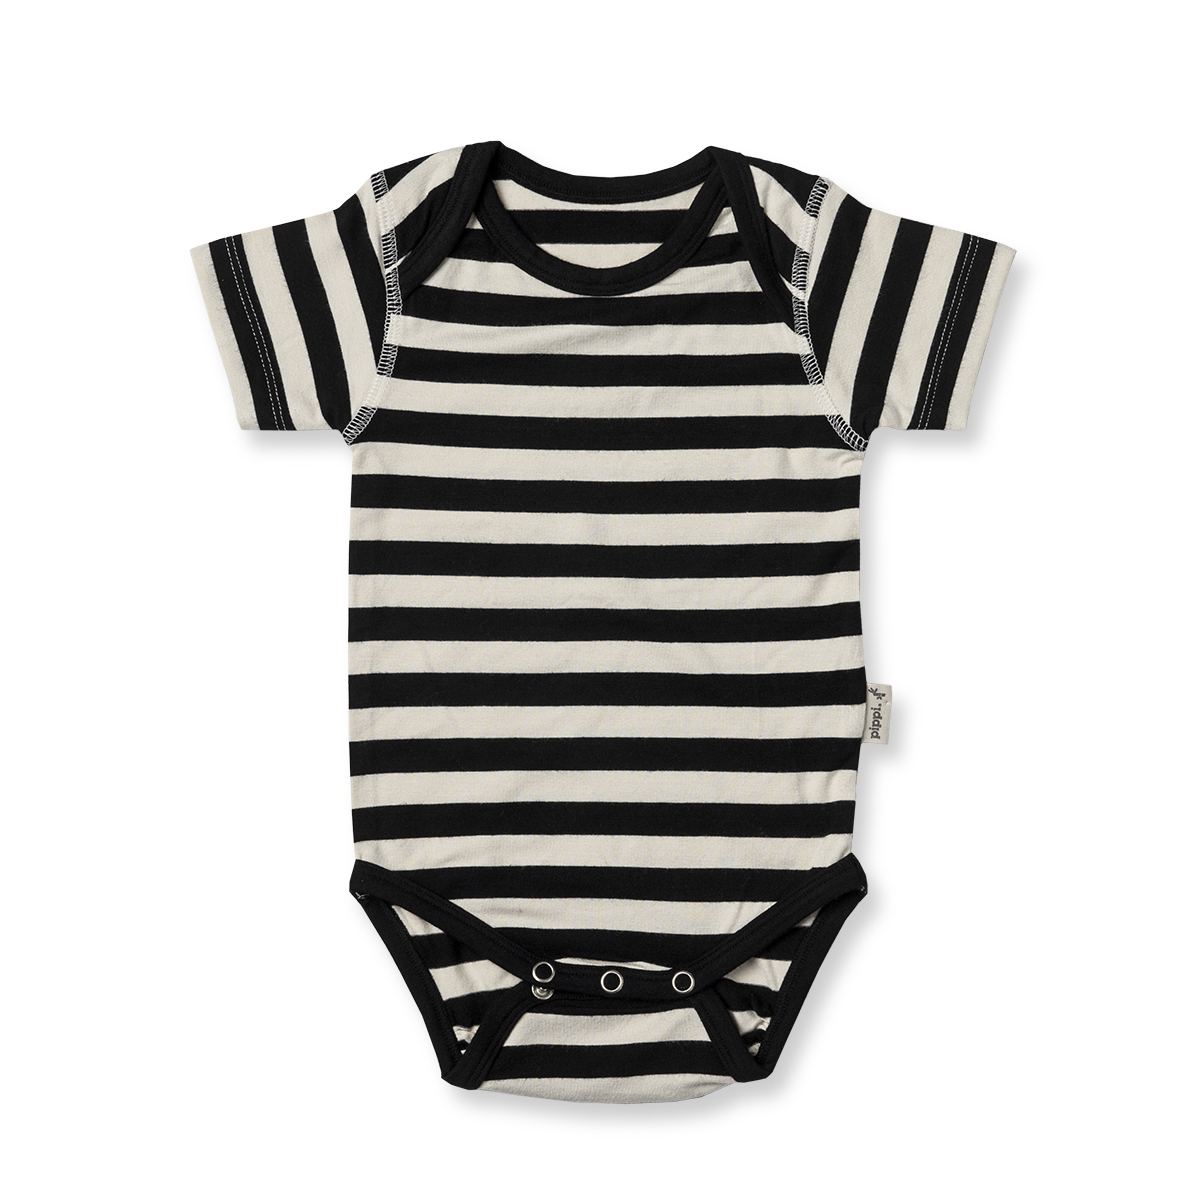 Black and white striped bodysuit with short sleeves, boat neckline. 